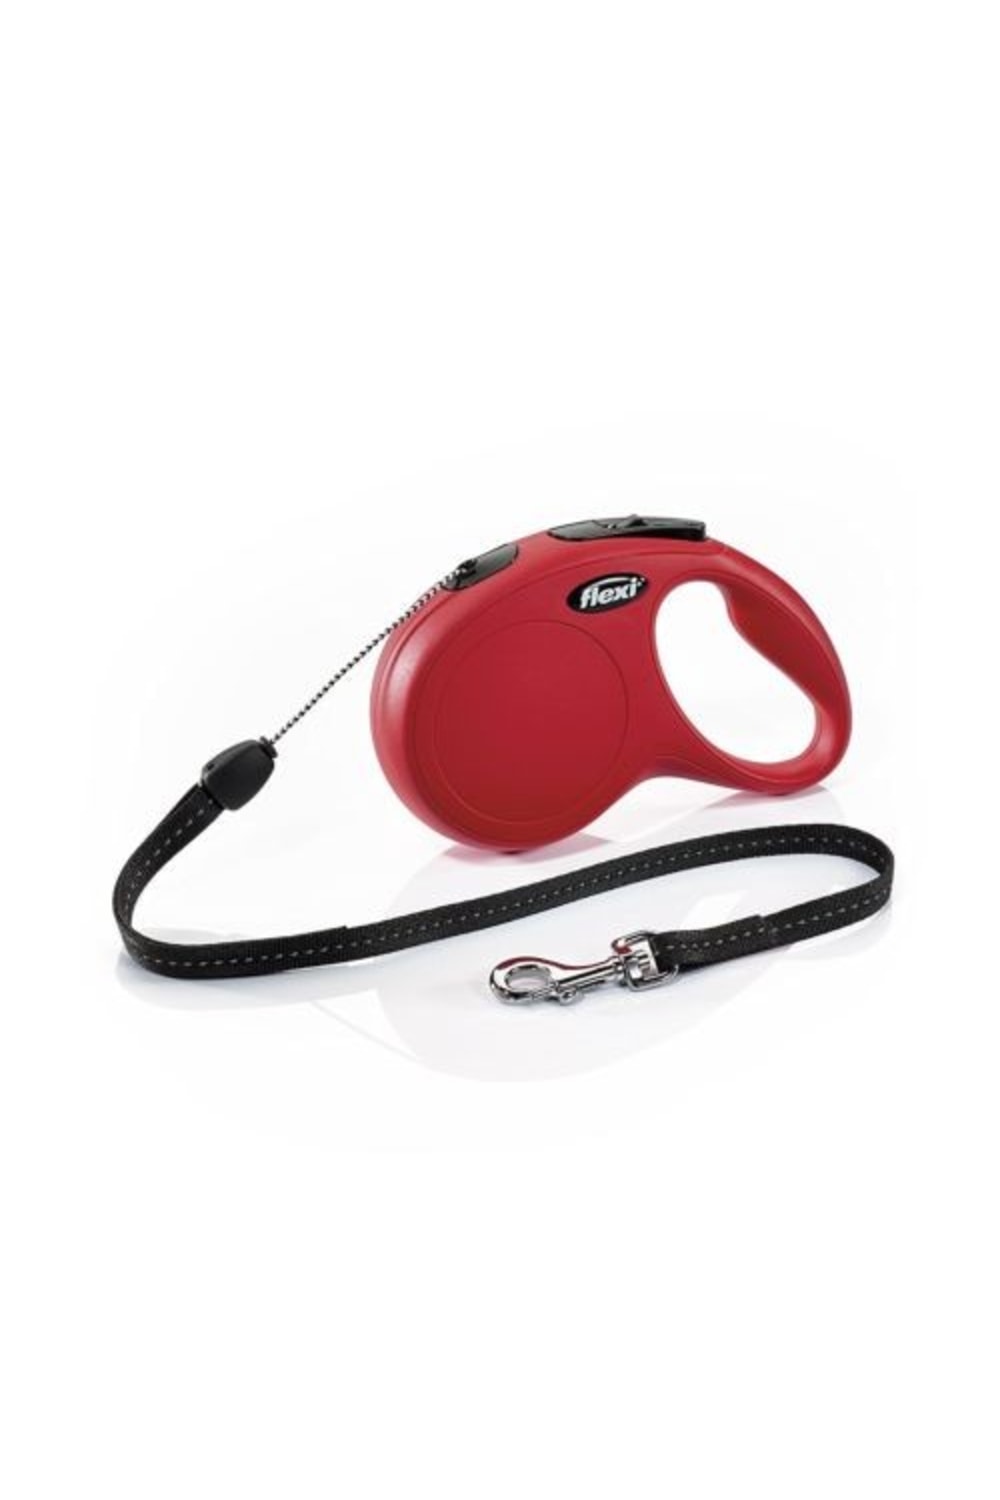 Flexi New Comfort Retractable Tape Dog Leash (Red) (S (26.3ft))